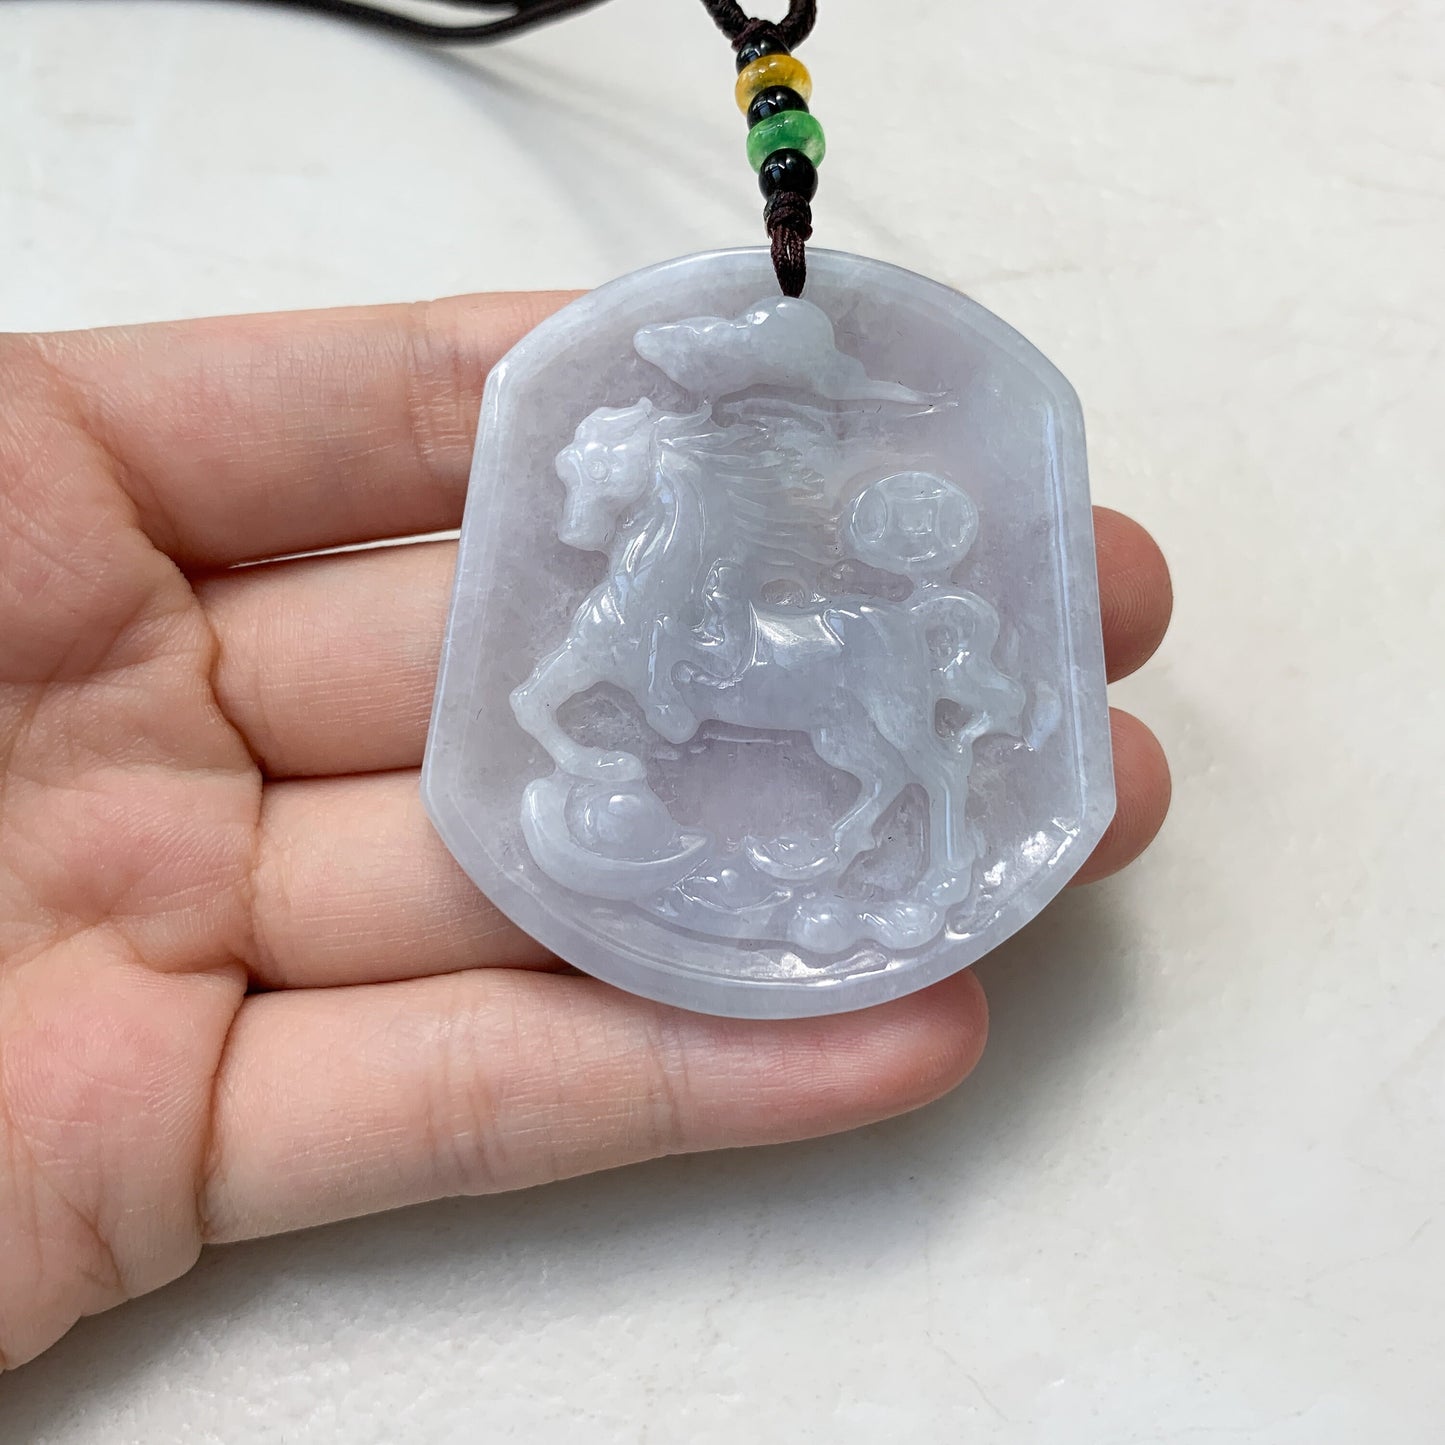 Large Horse Jade Jadeite Chinese Zodiac Carved Pendant Necklace, YJ-0321-0442959 - AriaDesignCollection